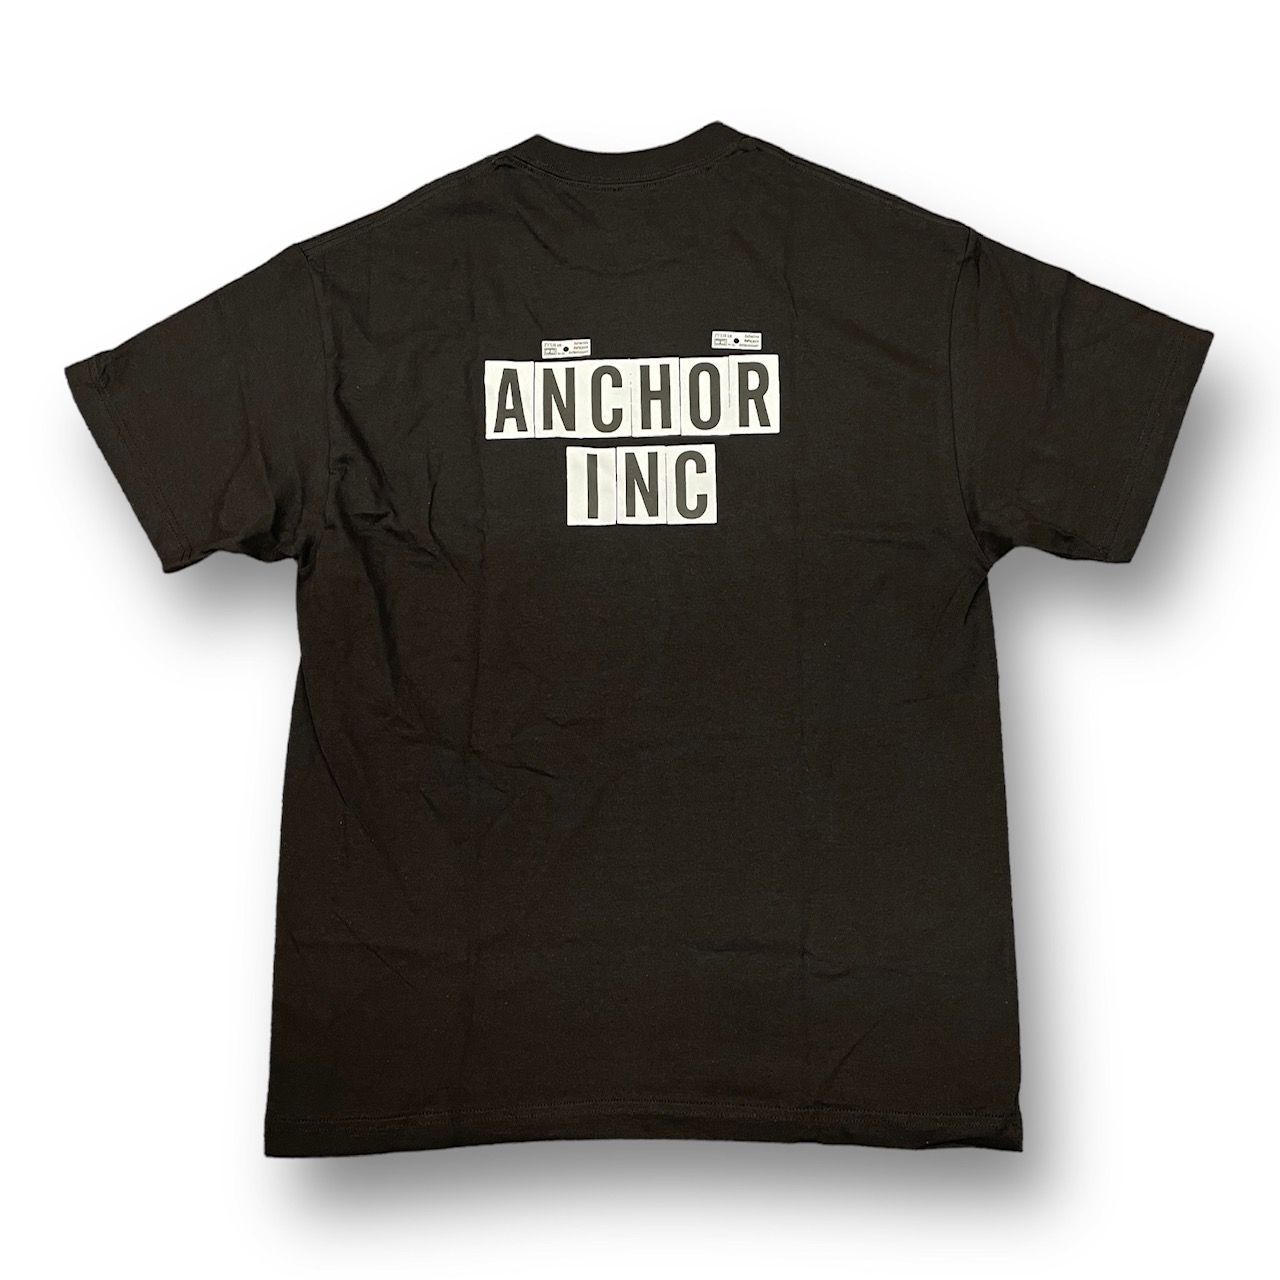 MERCEDES ANCHOR INC Reflective Letter Tee リフレクティブ レター